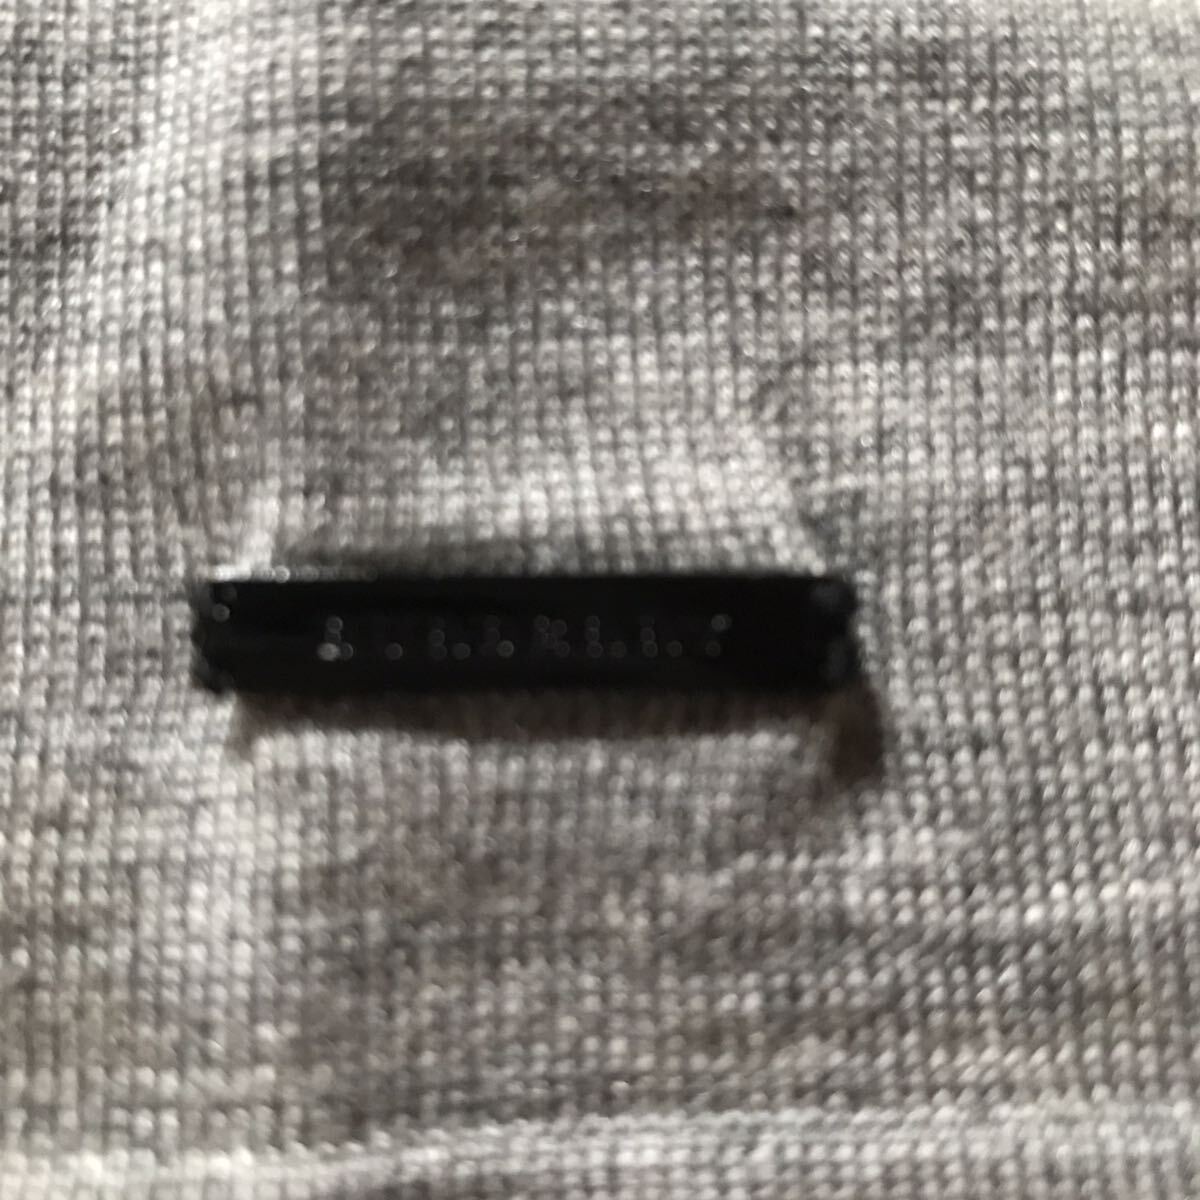  Burberry burberry london knitted short sleeves gray 